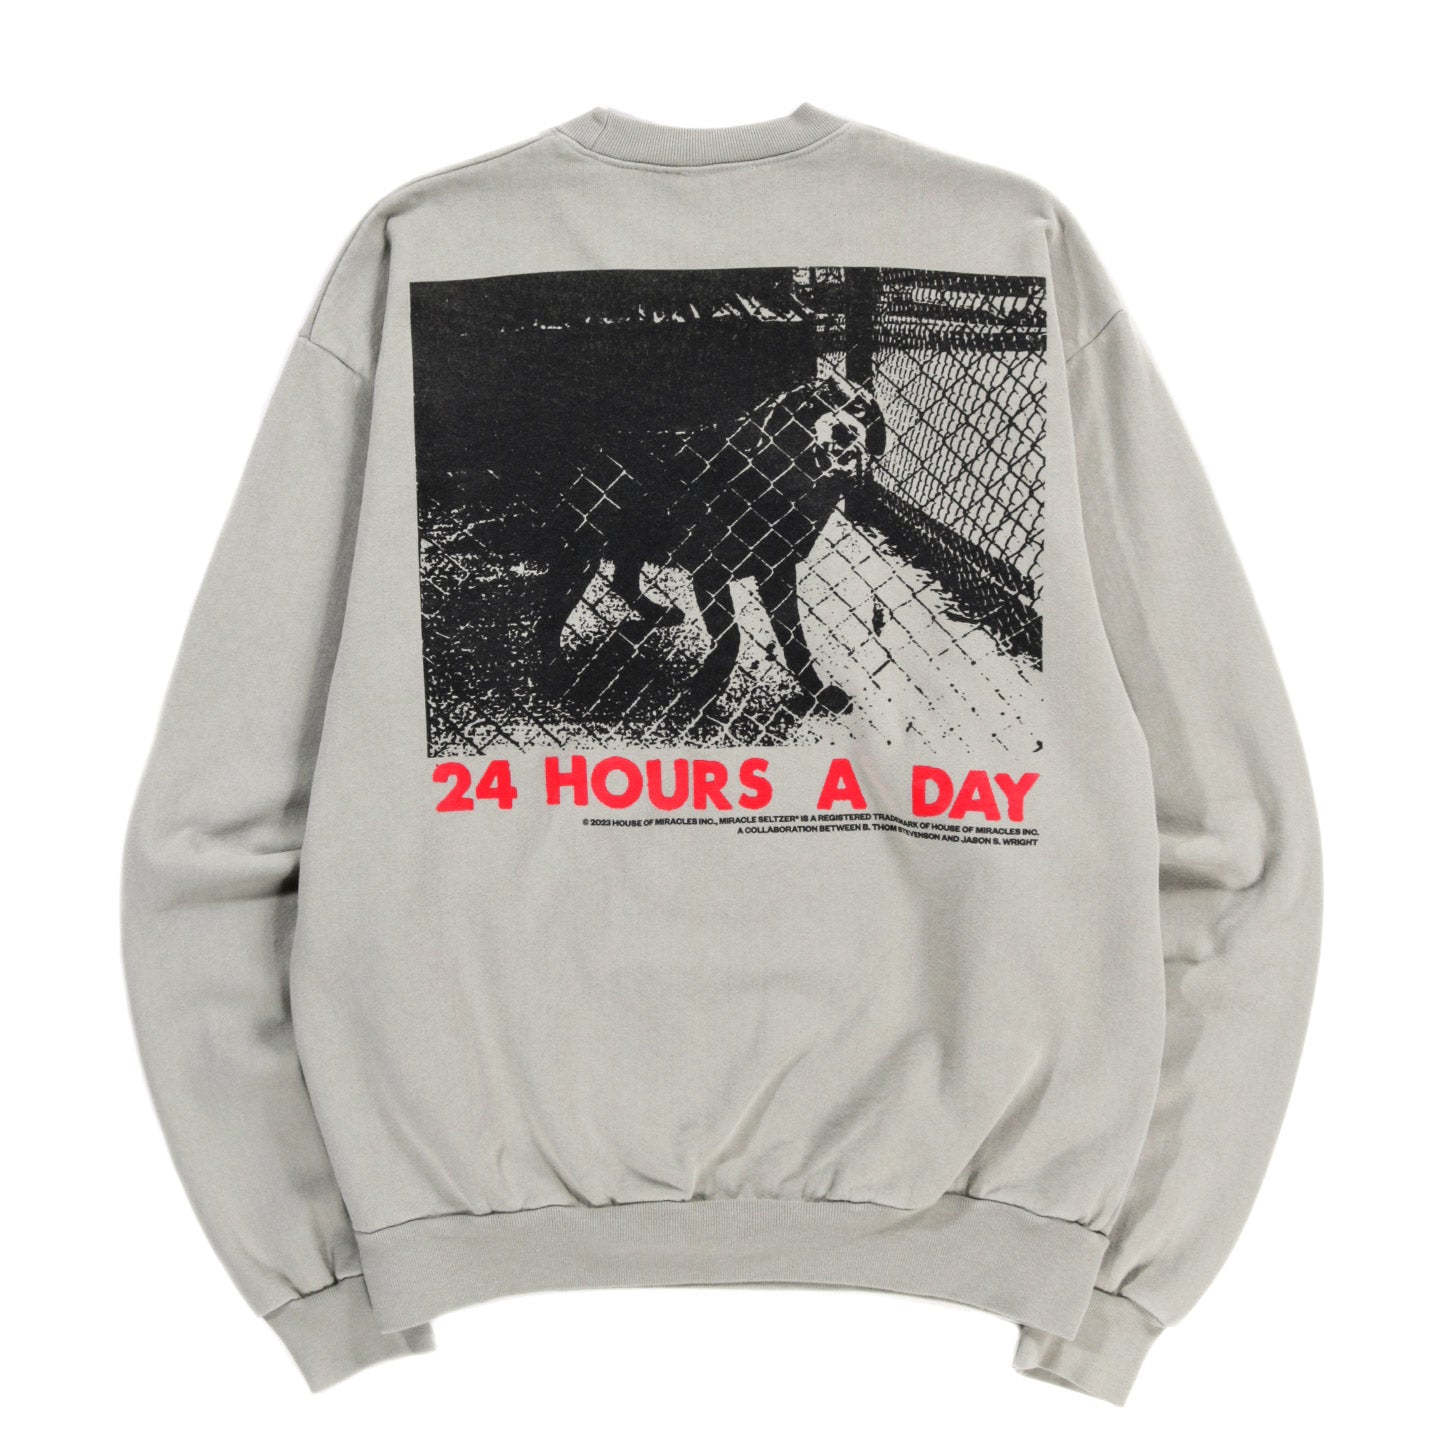 HOUSE OF MIRACLES 24 HOURS A DAY CREWNECK SWEATSHIRT SAGE